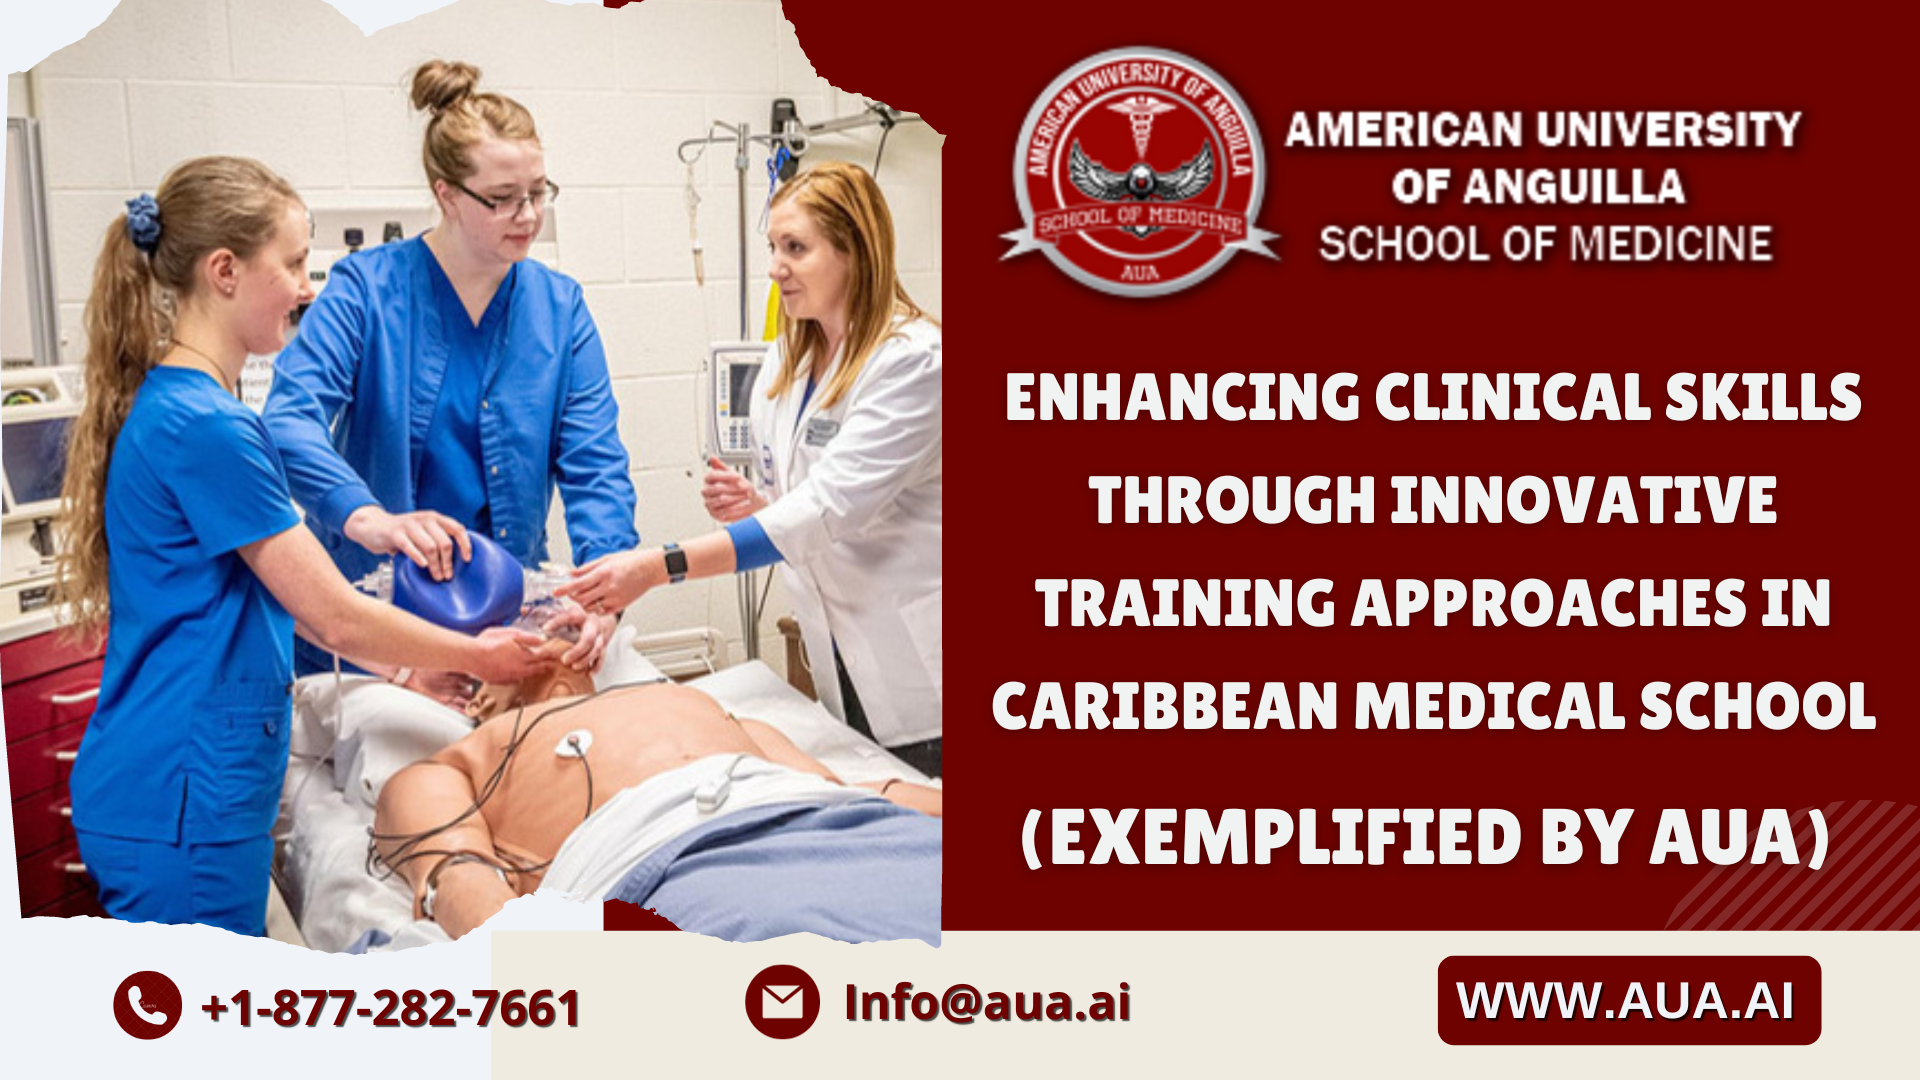 Enhancing Clinical Skills through Innovative Training Approaches in Caribbean Medical School